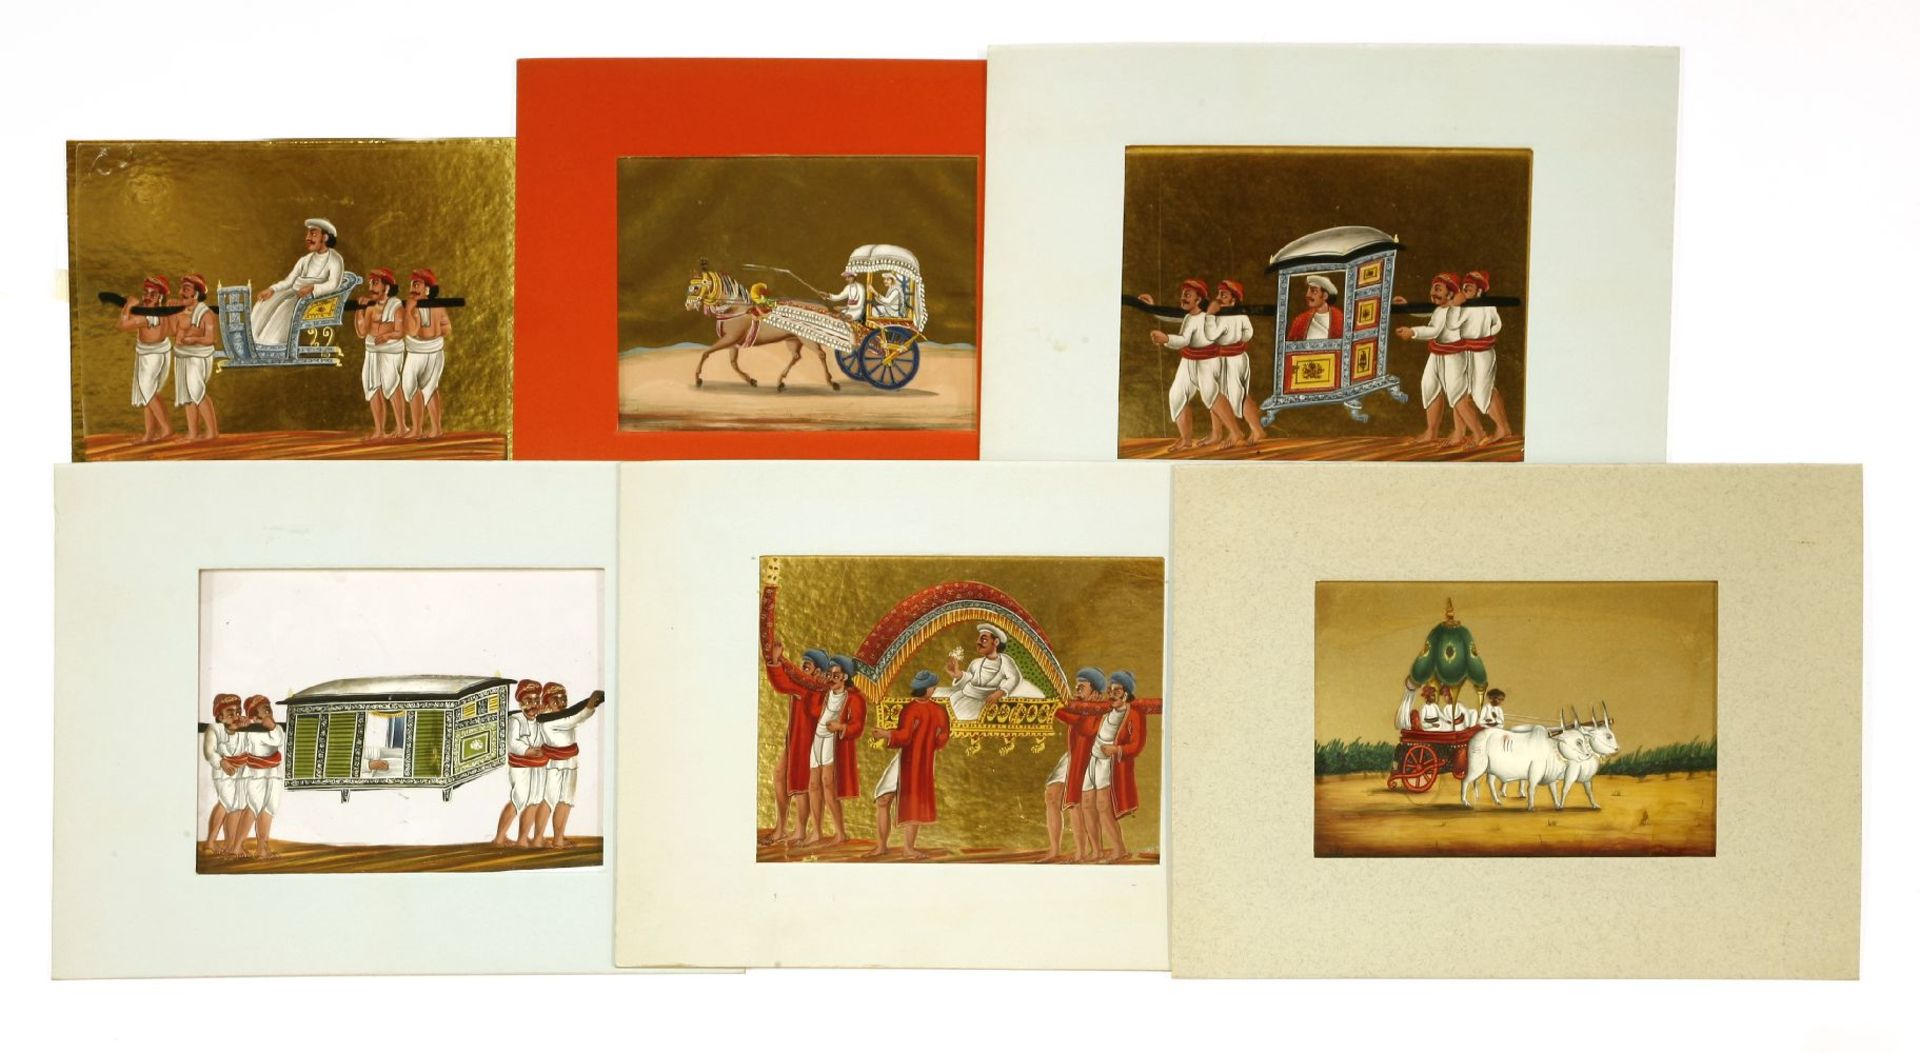 Six Indian paintings on mica,early 19th century, depicting a palanquin, a horse-drawn carriage and a